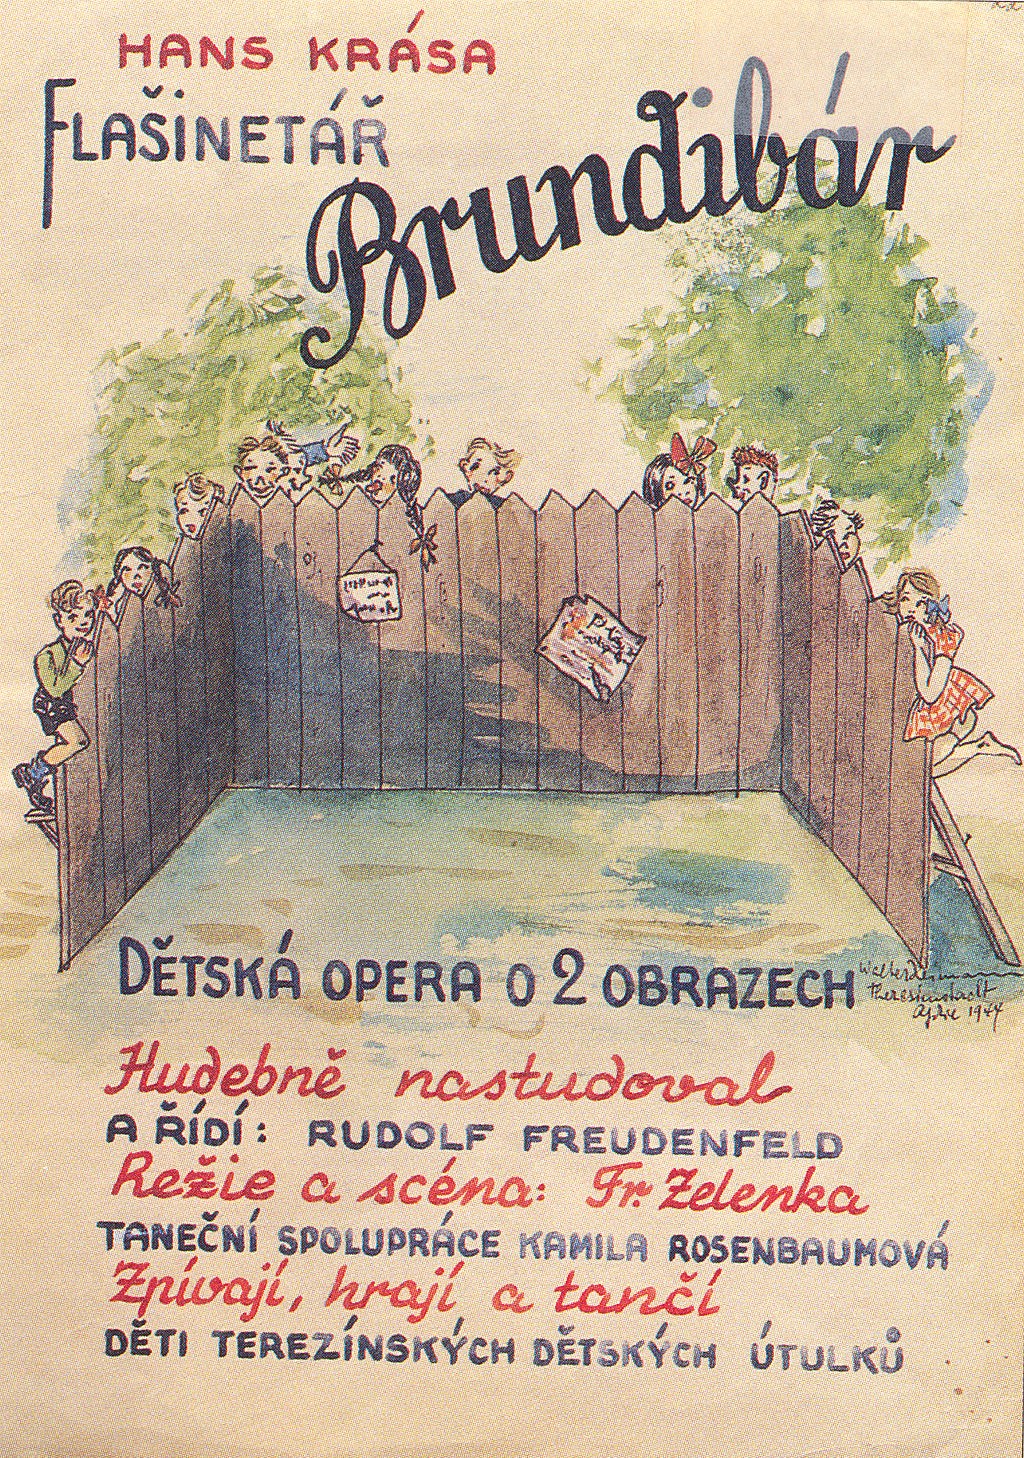 The poster of Brundibár features a charming drawing of a wooden fence with girls in bows and boys in knickers peering over the top. The children focus on the names of the artists credited with producing the opera. I immediately noted the choreography was by someone named Kamila Rosenbaumová.